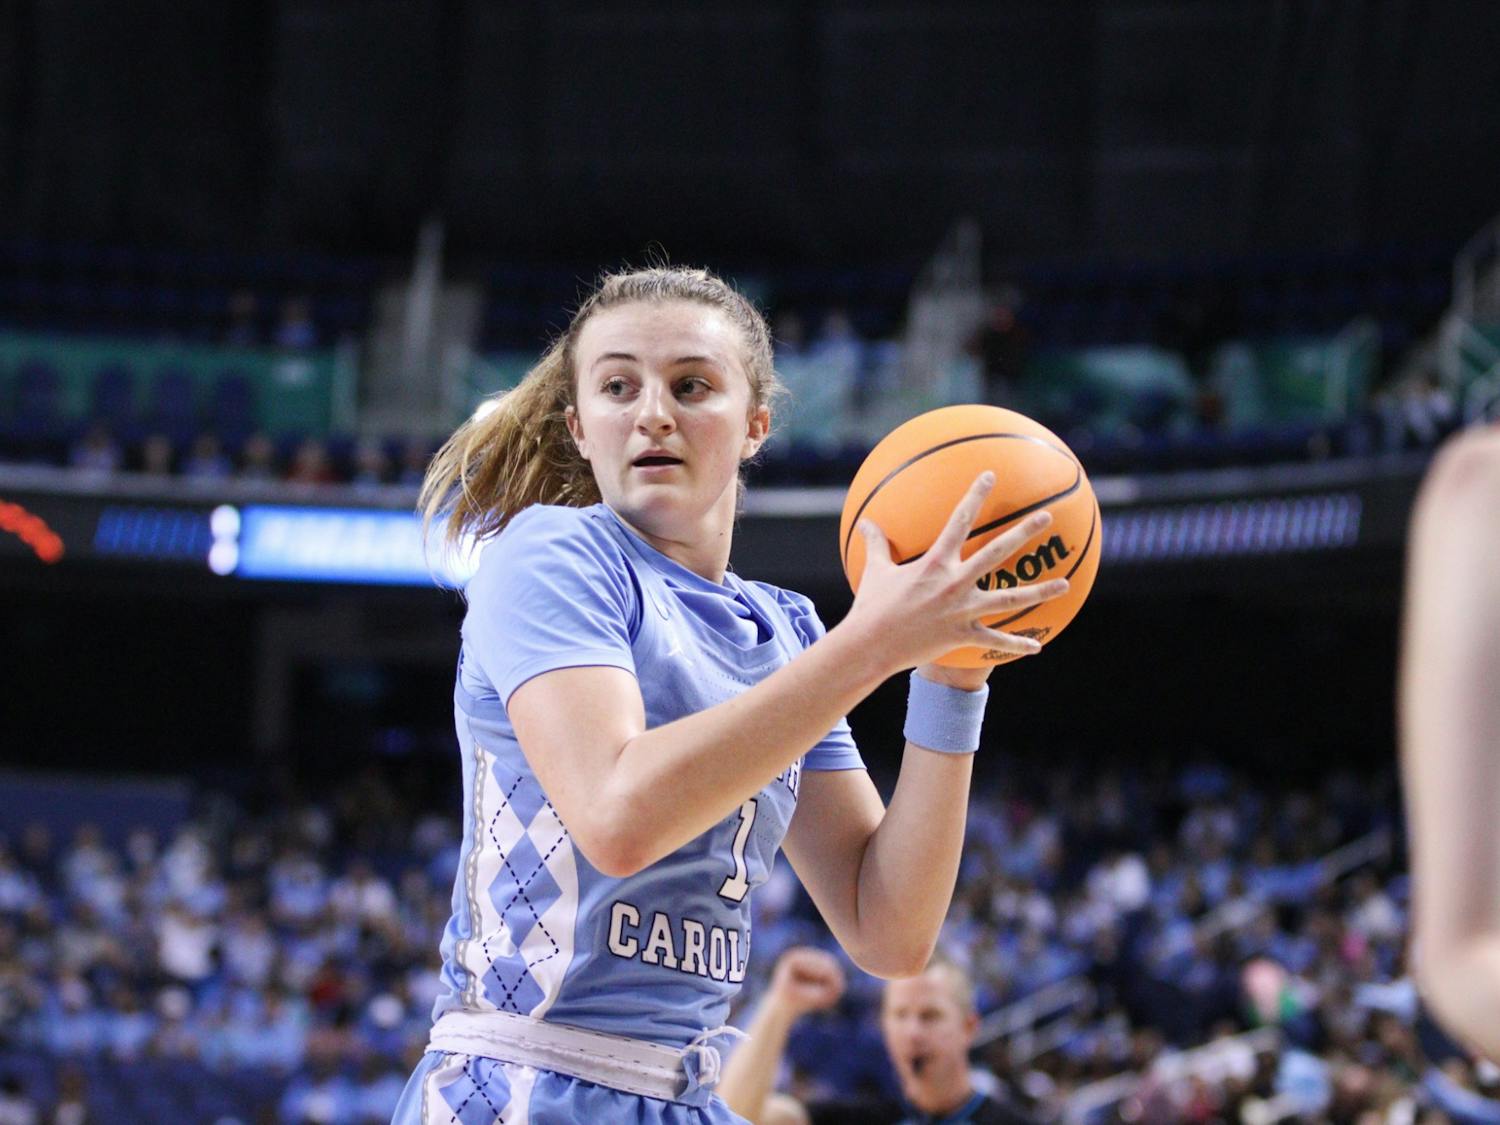 Sophomore guard Alyssa Ustby (1) looks for an open pass. UNC lost to South Carolina 61-69 in Greensboro on Friday, March 25, 2022, eliminating them from the NCAA tournament.